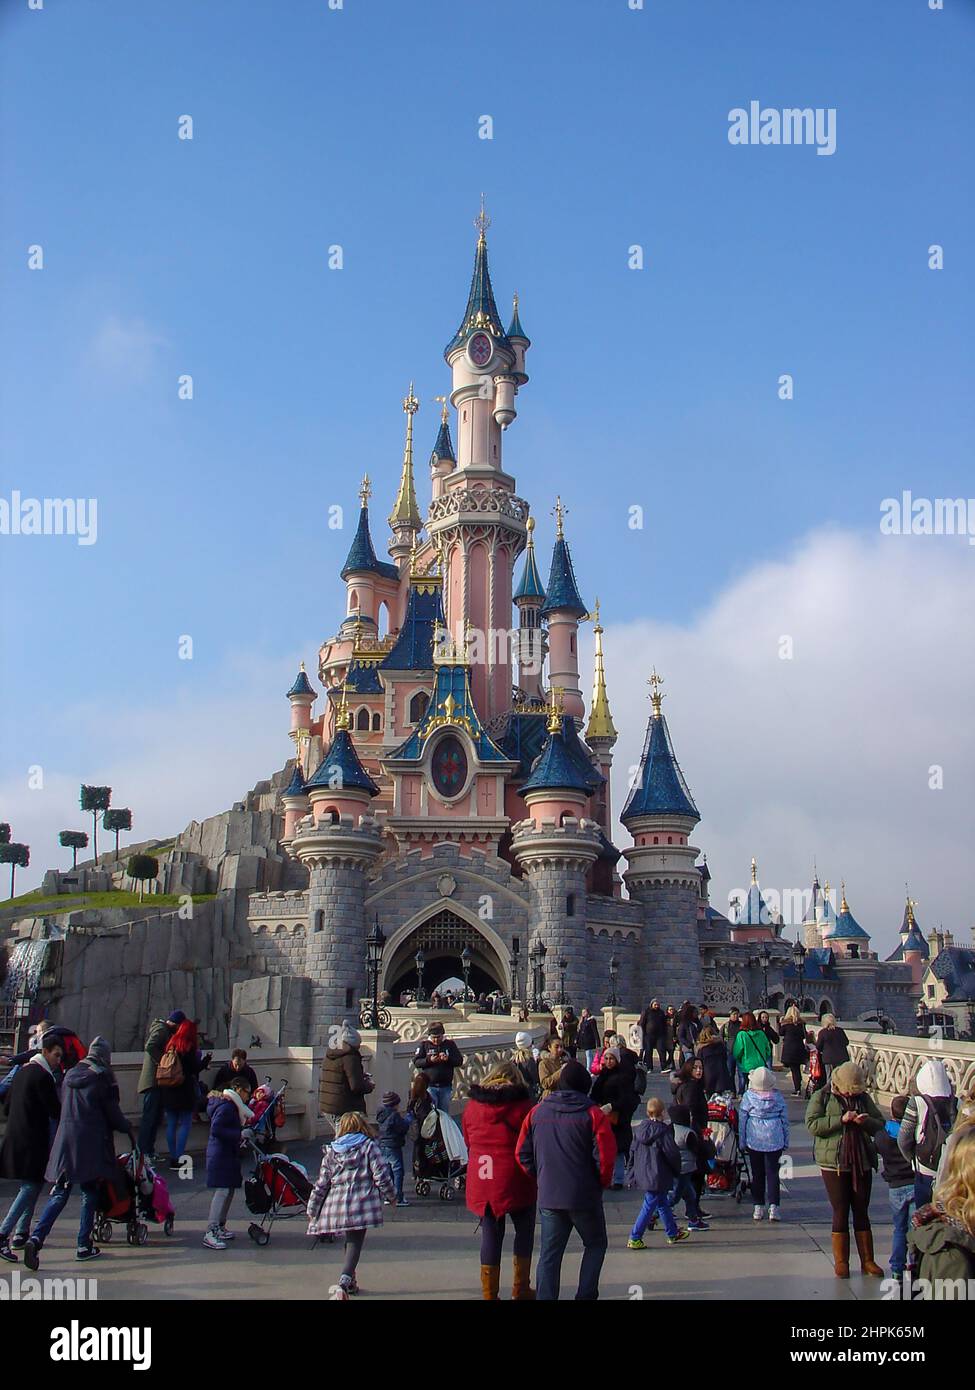 Disneyland Paris princess castle. Magical moments with family and friends. Stock Photo